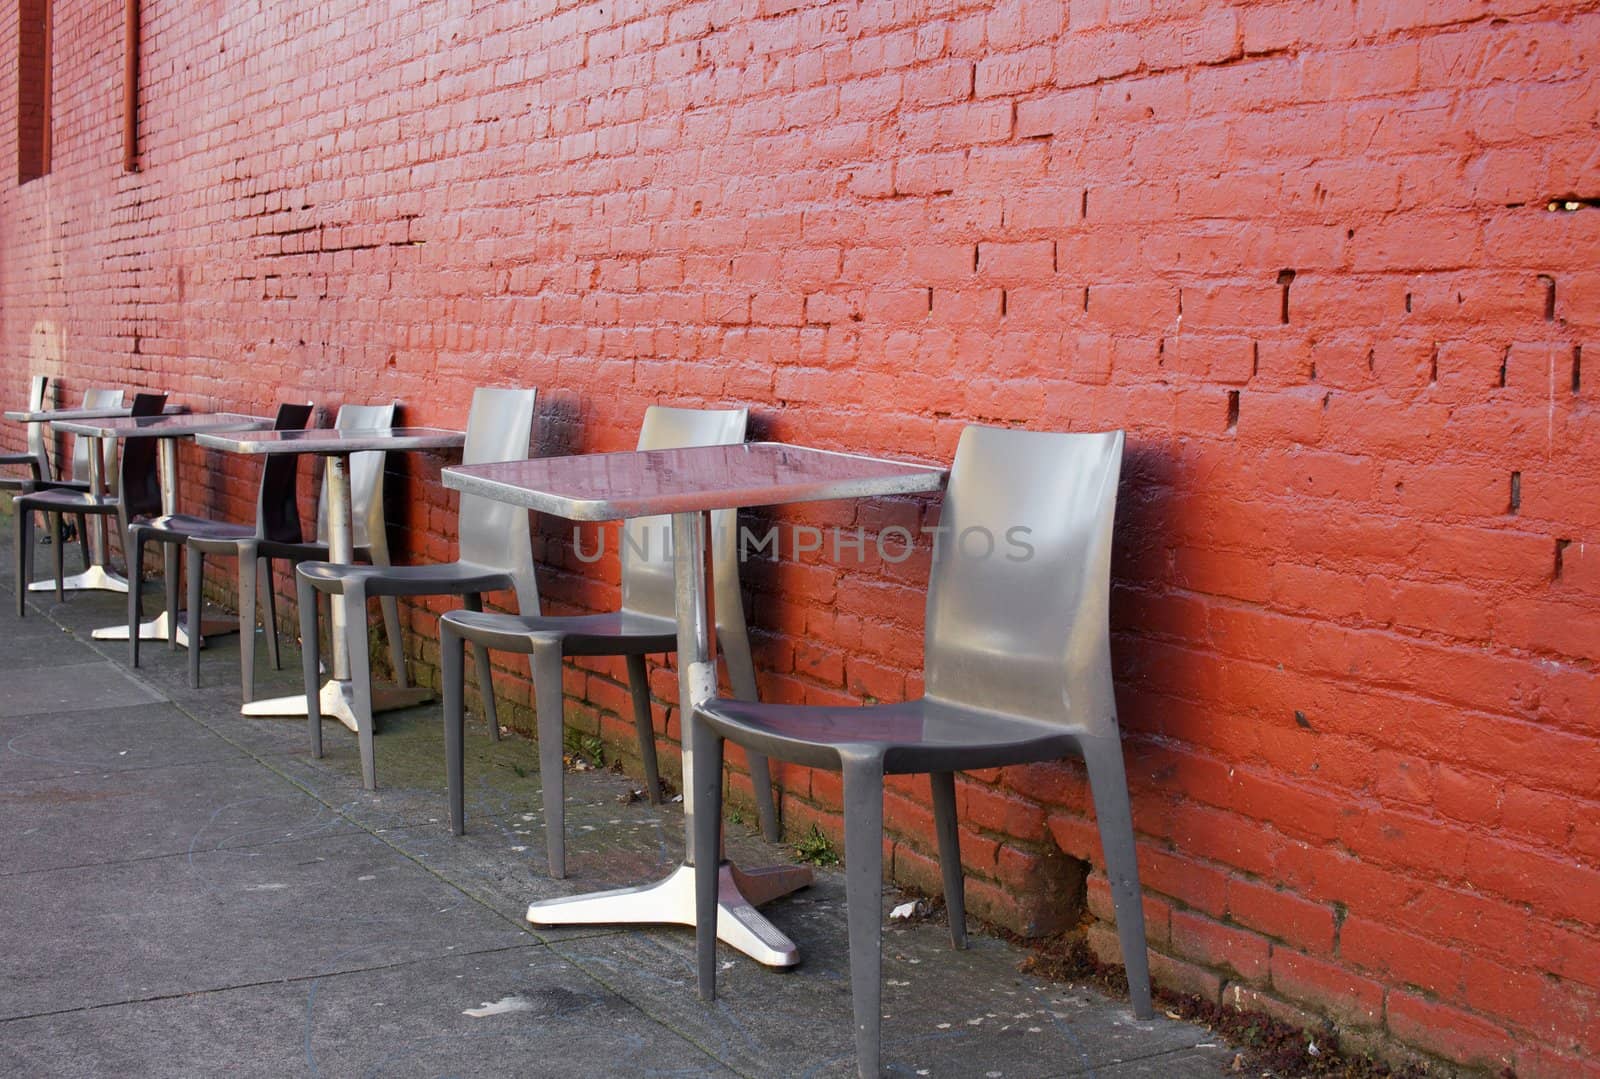 Brushed aluminum tables and chairs on a sidwalk against a red brick wall